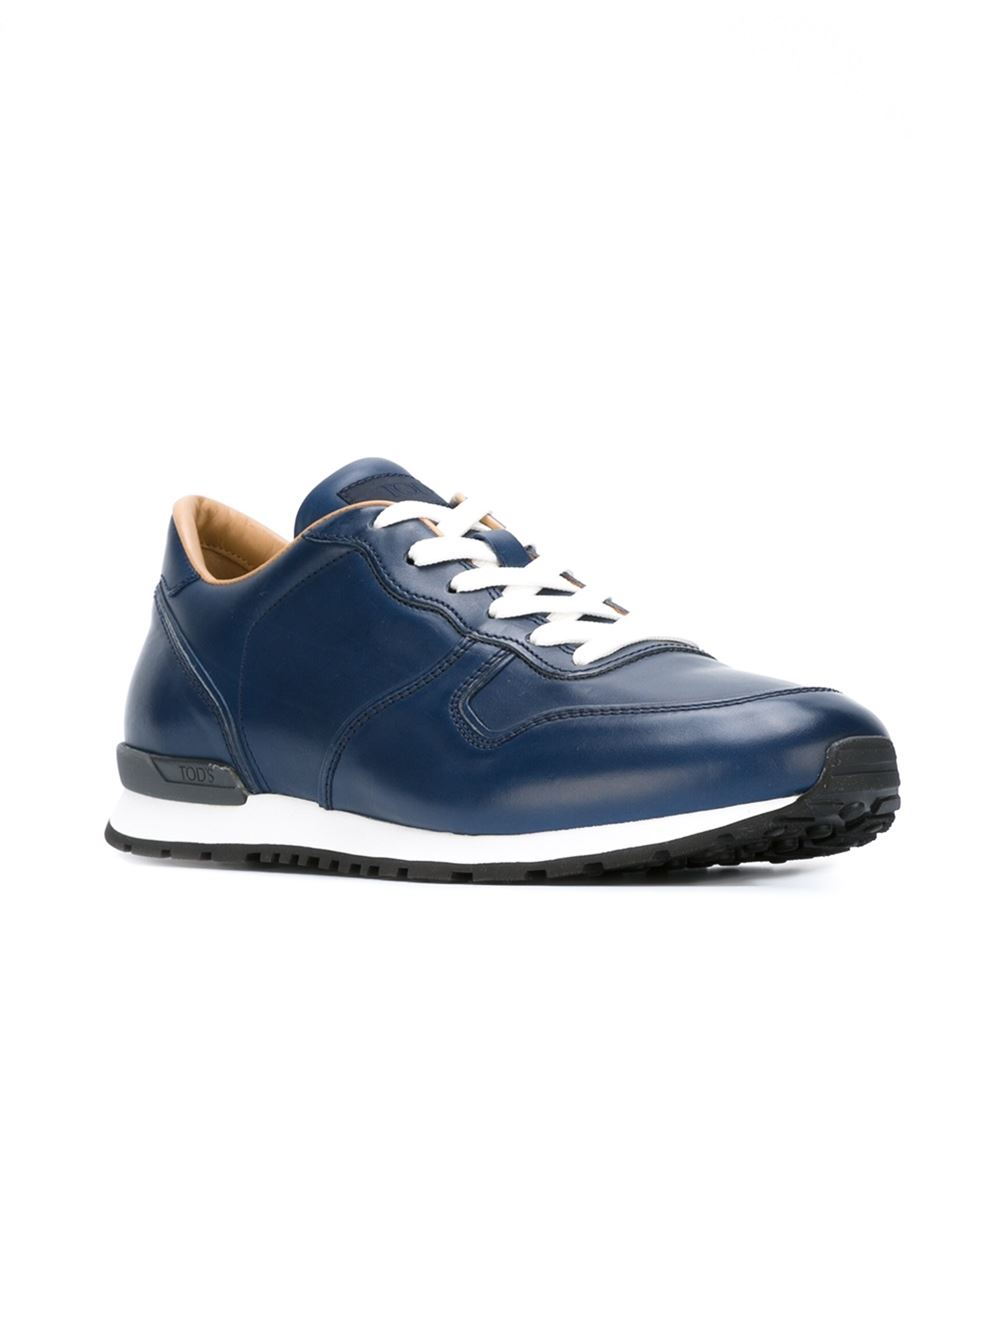 Lyst - Tod'S Low-top Sneakers in Blue for Men